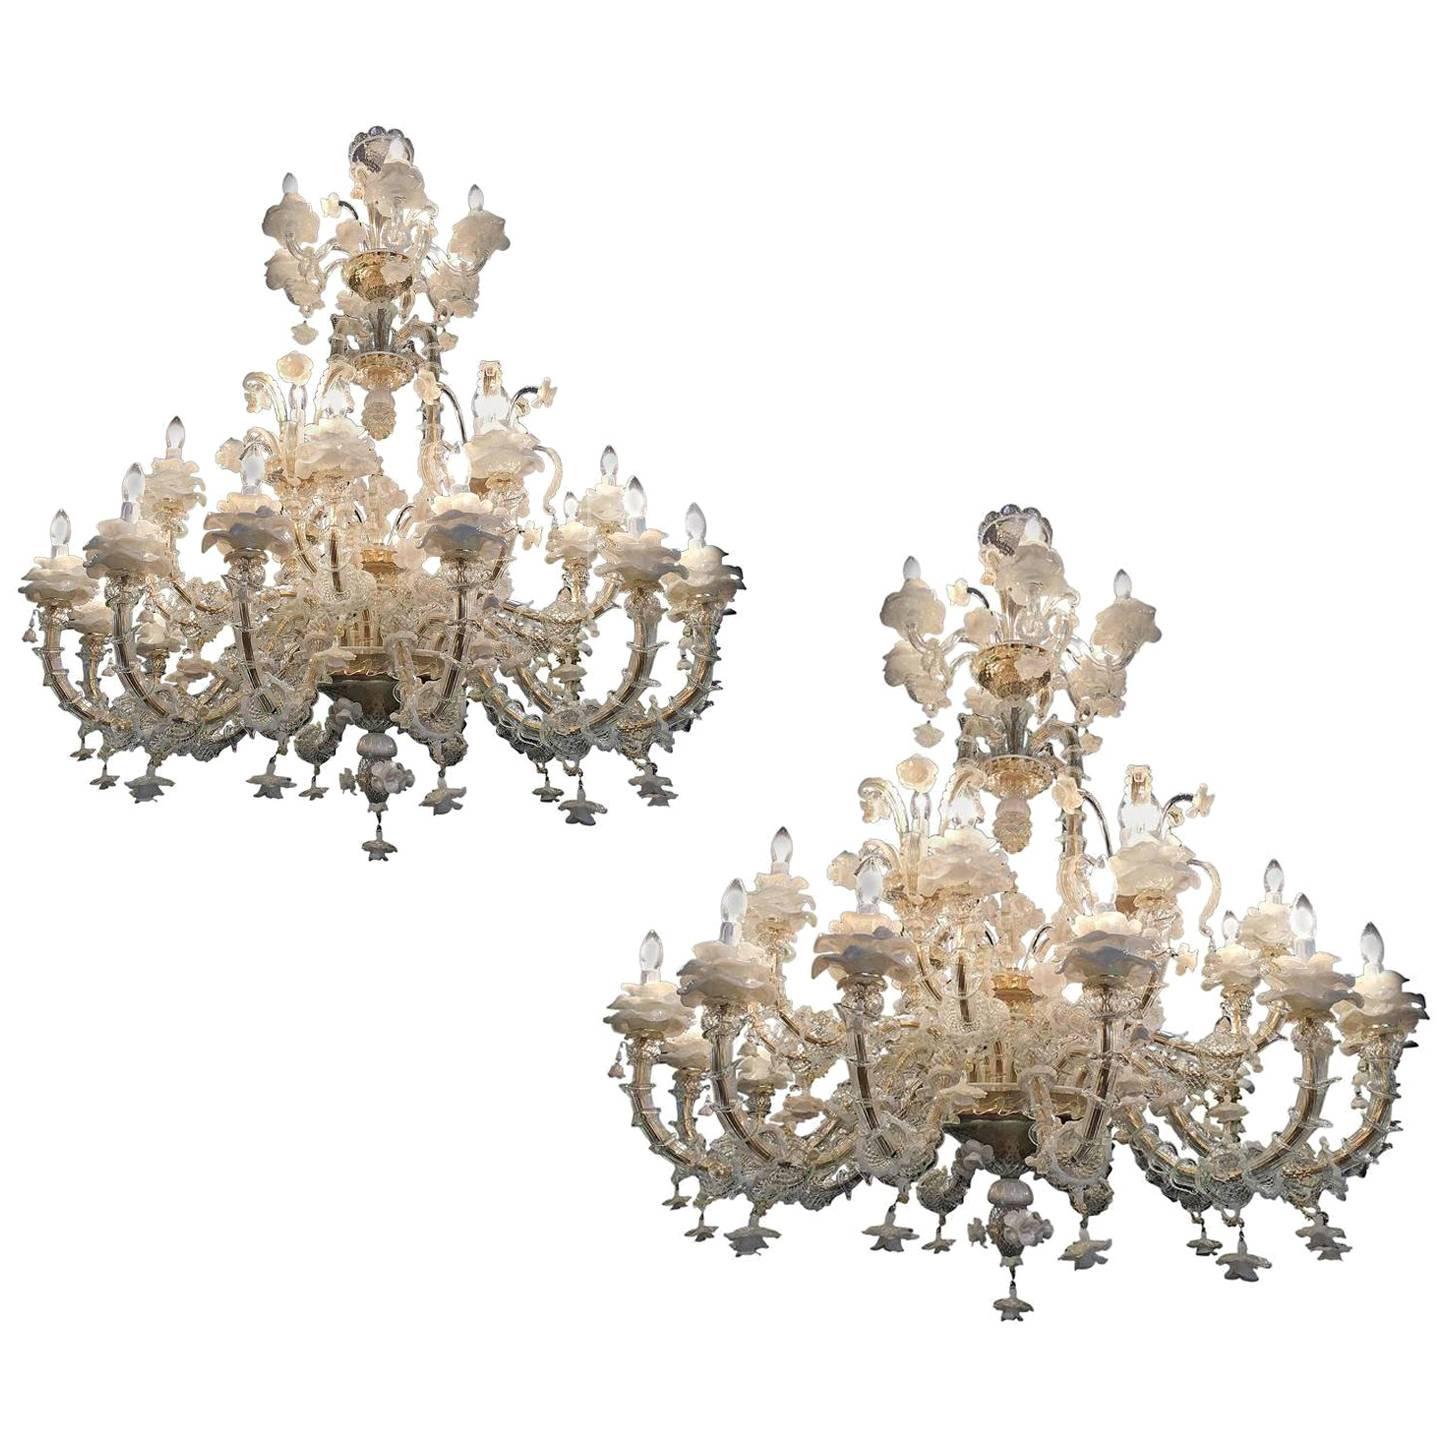 Pair of Rezzonico Chandeliers Glass Gold Inclusions, Murano